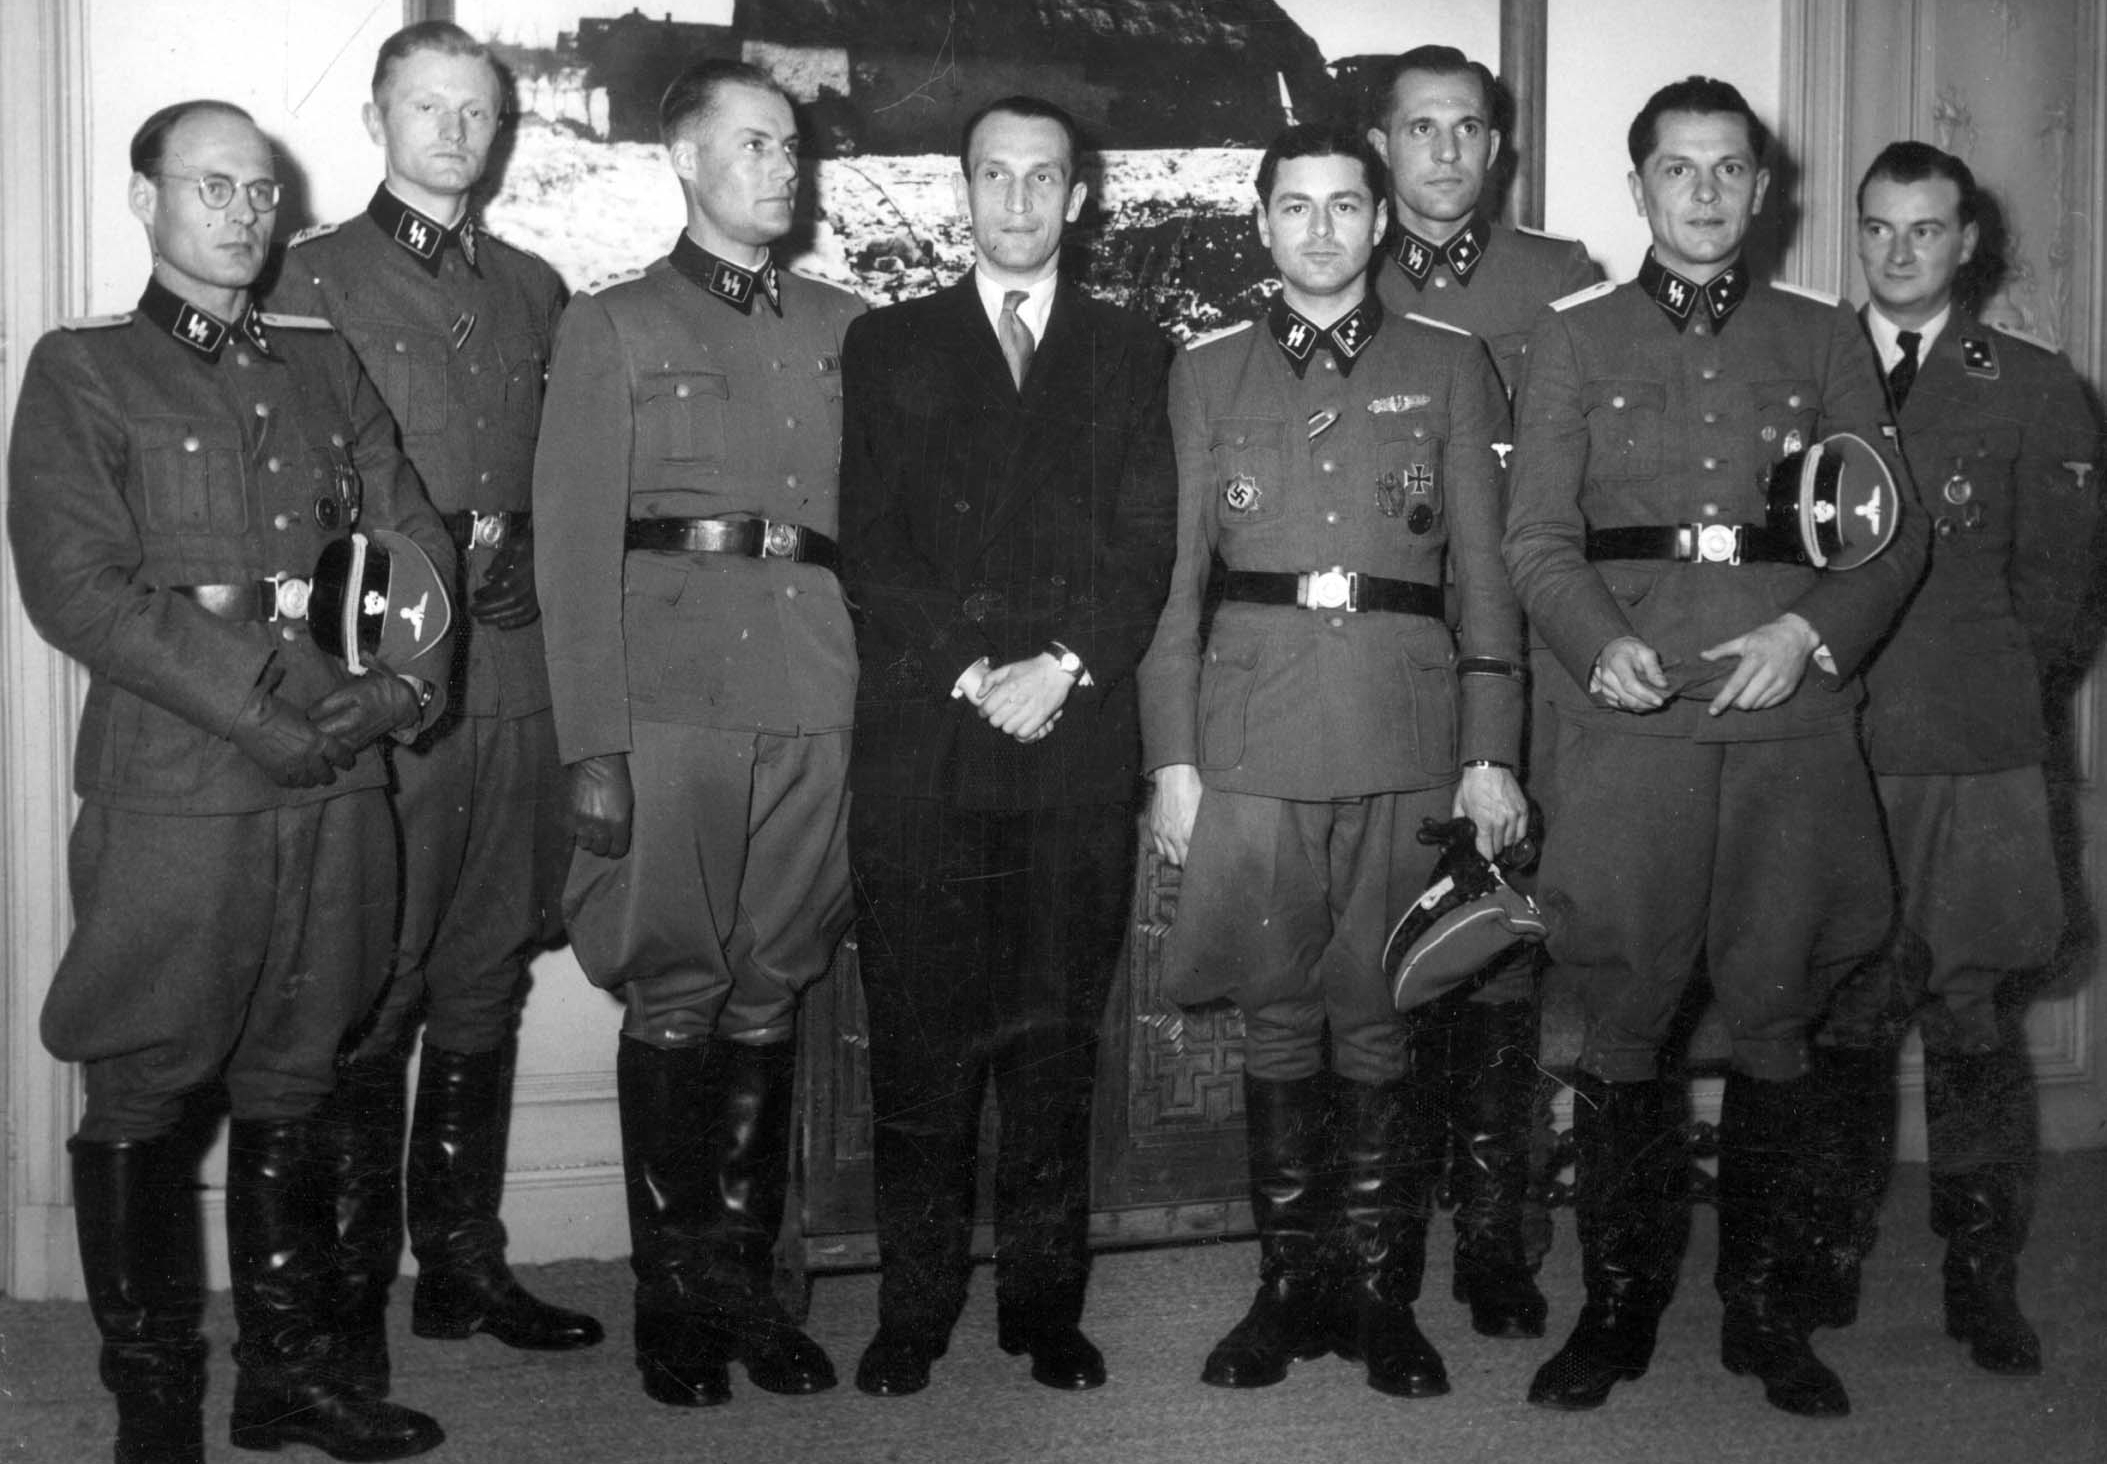 Victor Matthys at the SS-Junkerschule officer school at Bad Tölz, Germany, 16 Jun 1944